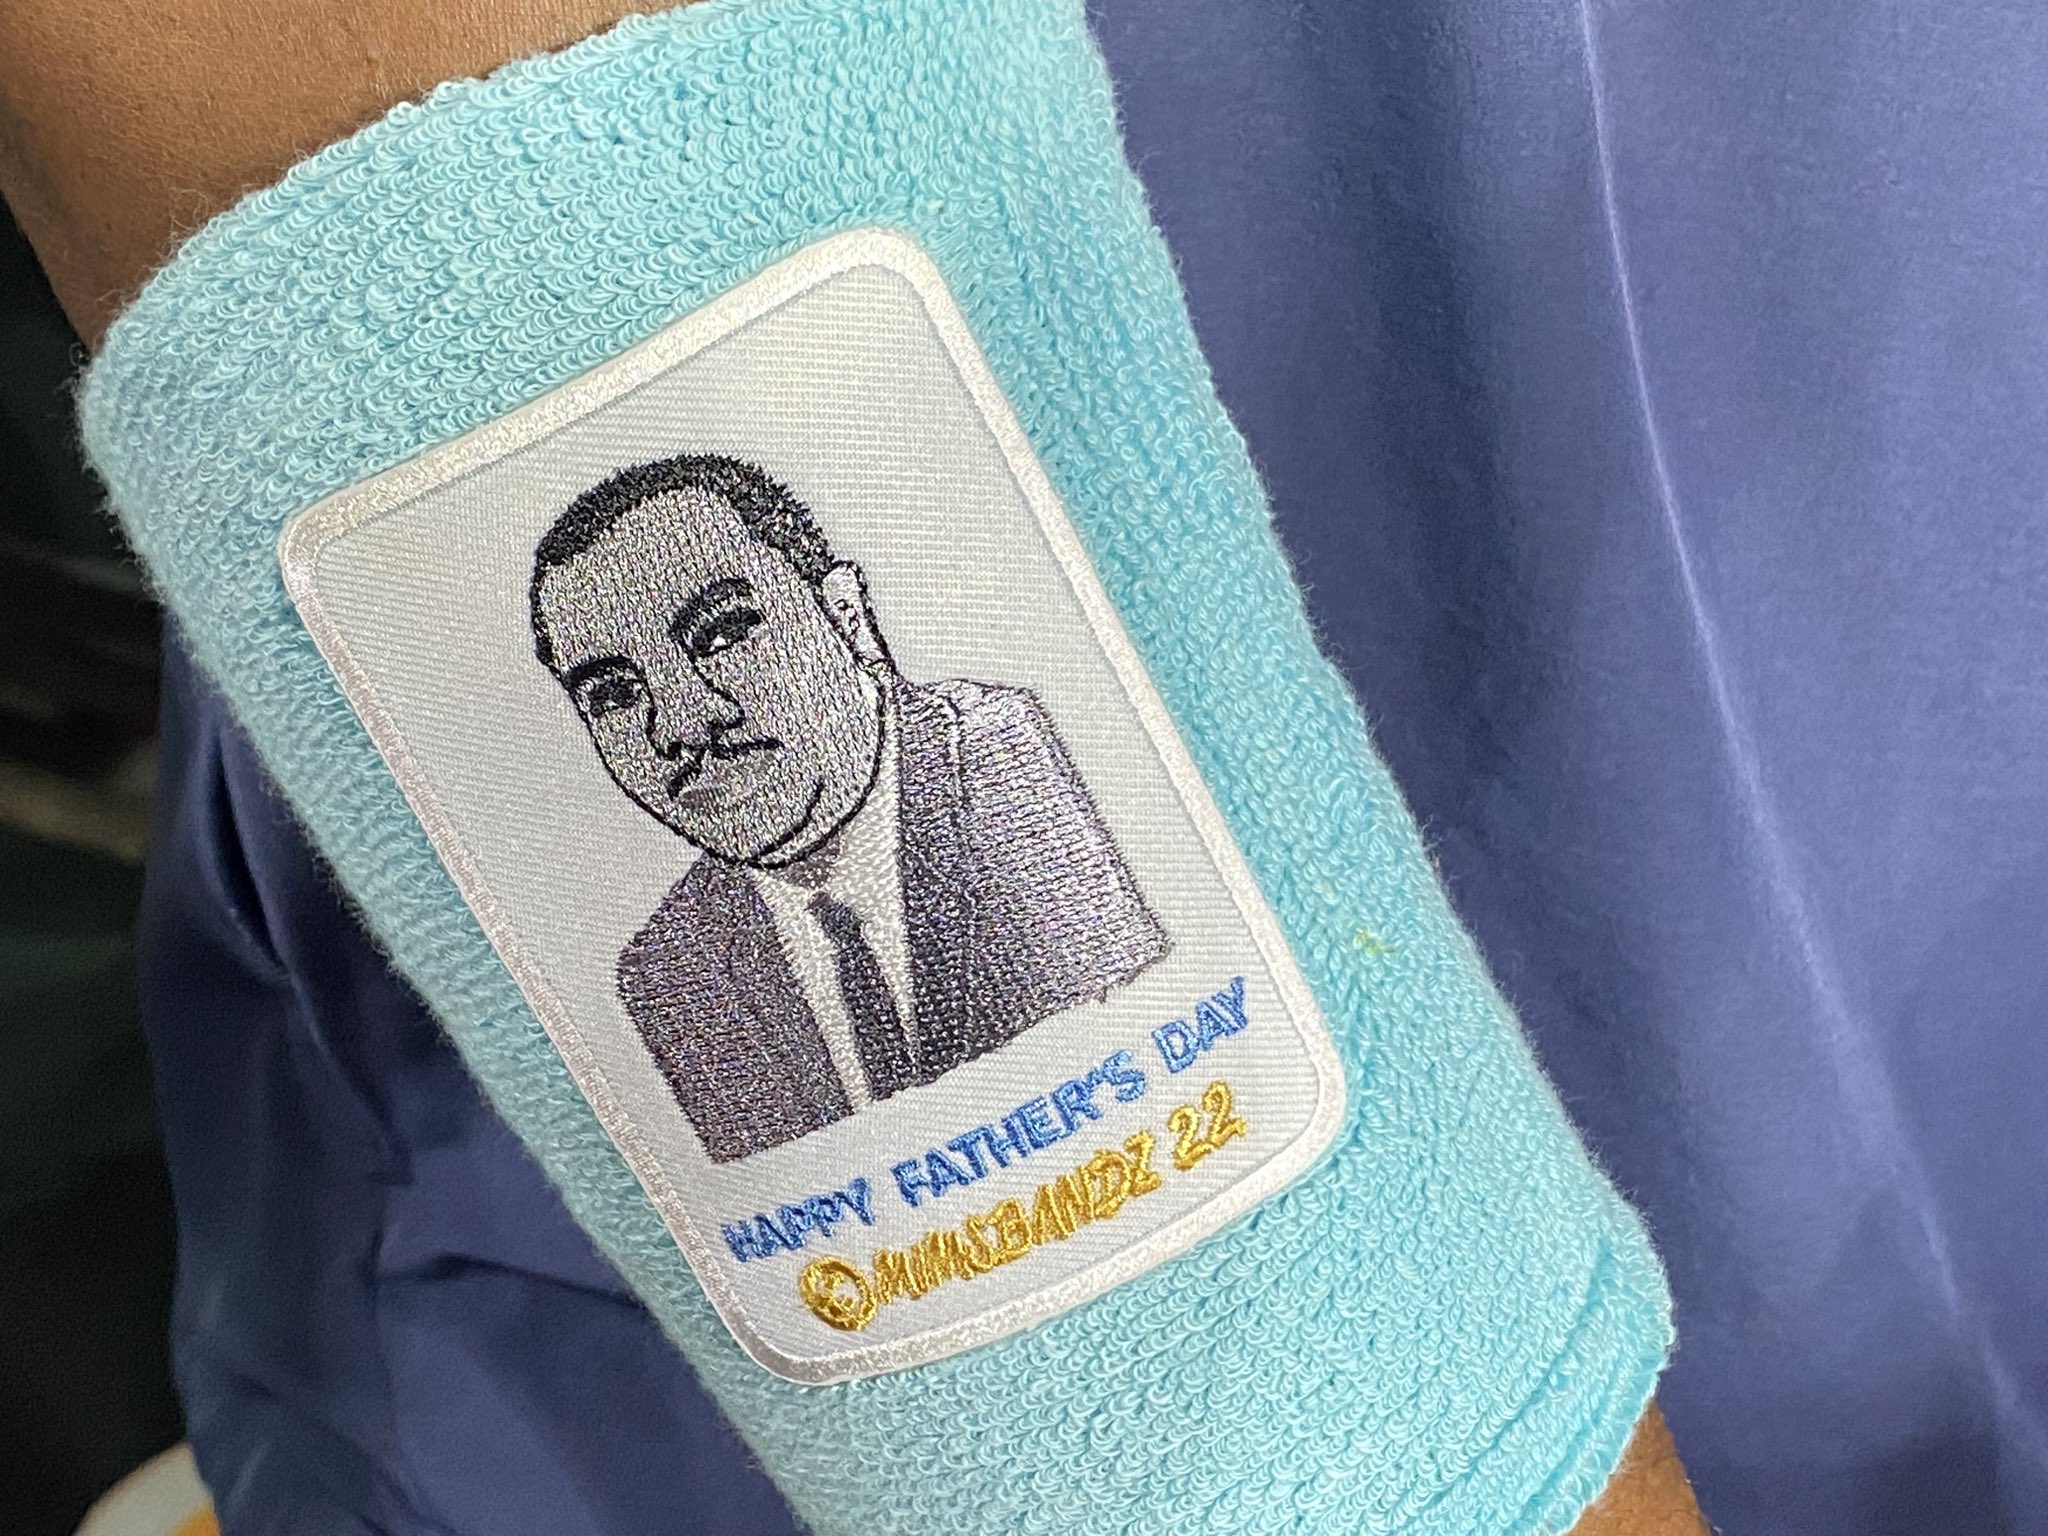 Dusty Baker Paid Tribute To His Father On His Wristbands